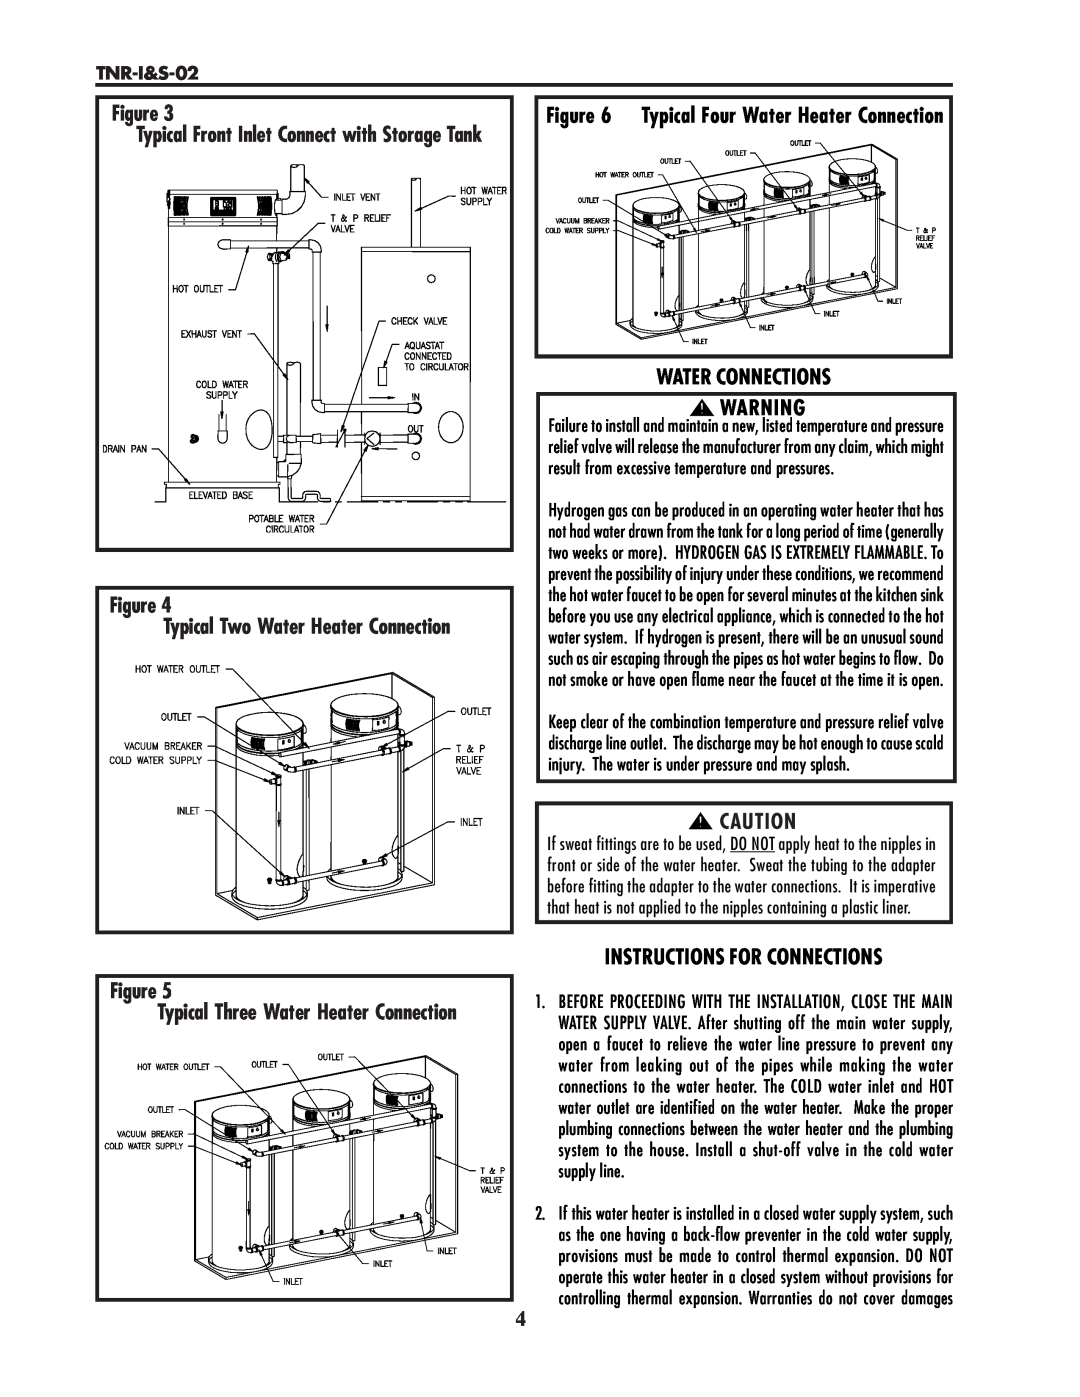 Lochinvar TNR-I&S-02 service manual Water Connections, Typical Two Water Heater Connection, Instructions For Connections 